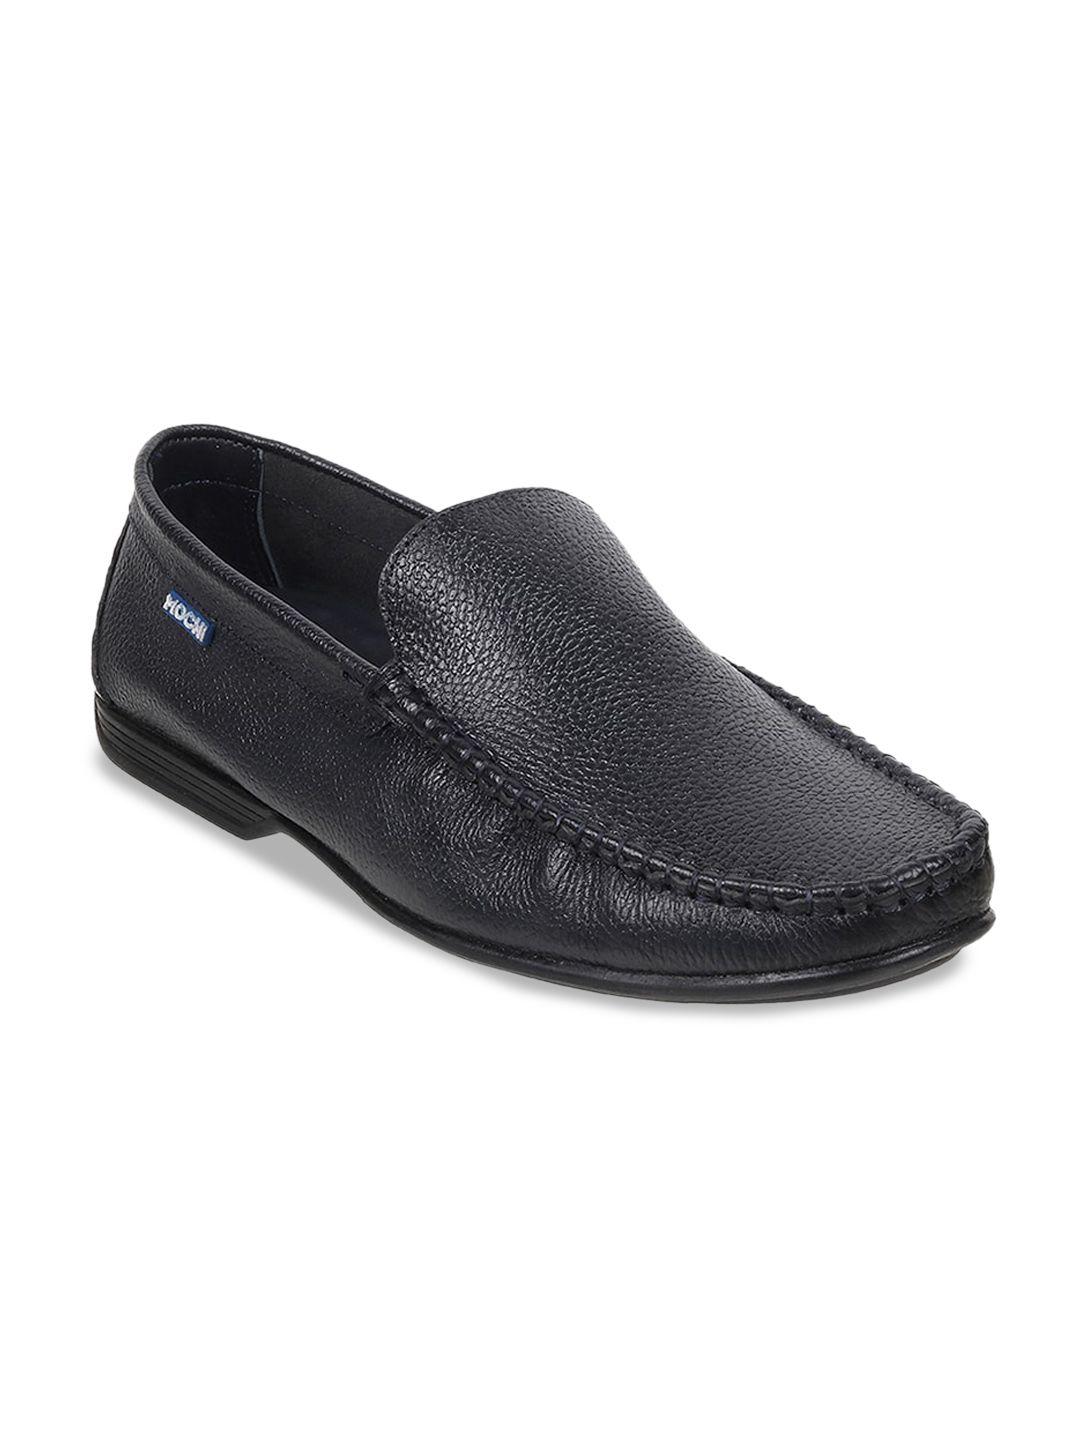 mochi men textured leather comfort insole basics loafers